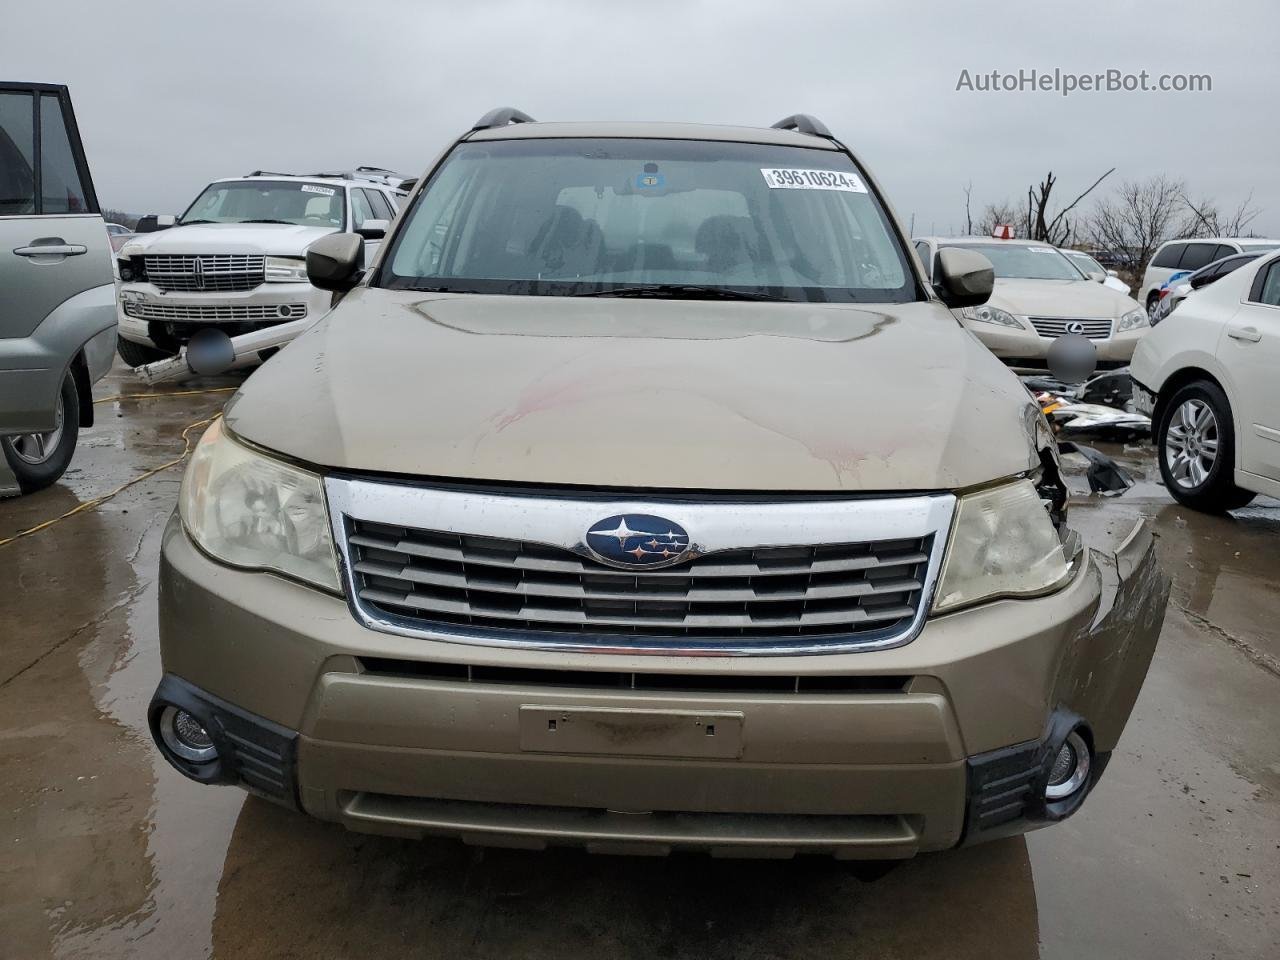 2009 Subaru Forester 2.5x Limited Gold vin: JF2SH64659H710305